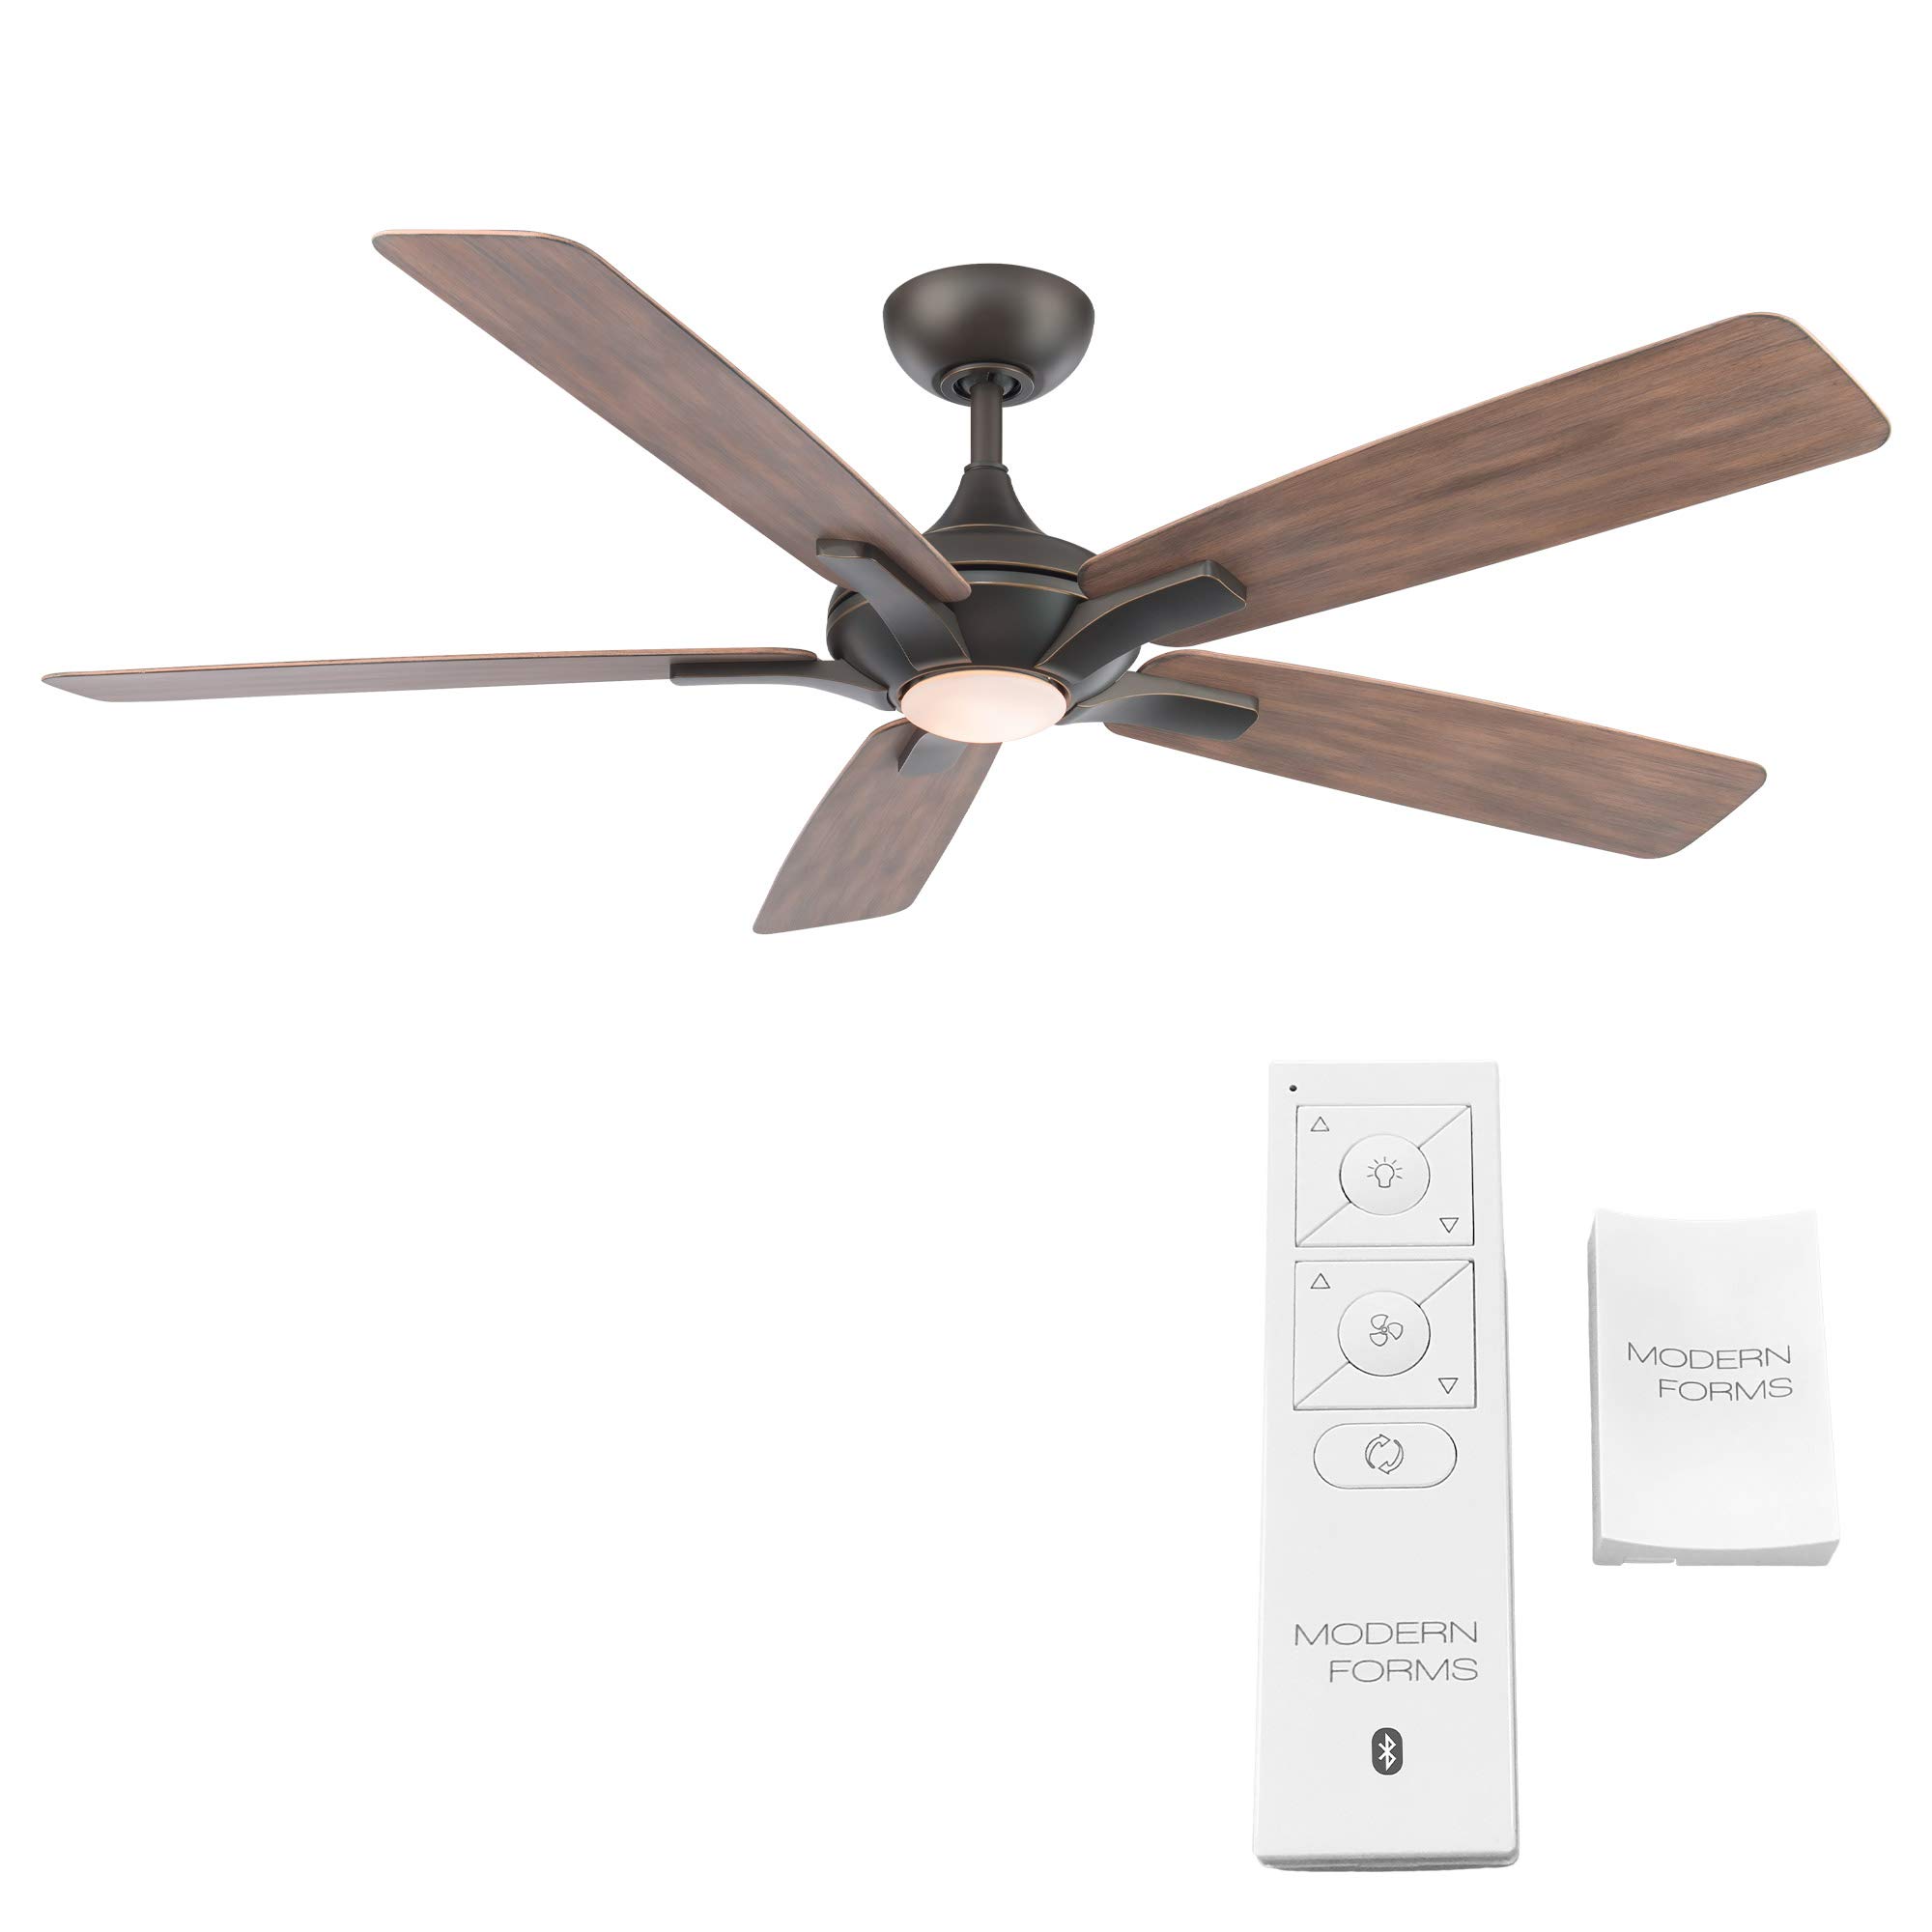 Mykonos Smart Indoor and Outdoor 5-Blade Ceiling Fan 60in Oil Rubbed Bronze Barn Wood with 3000K LED Light Kit and Remote Control works with Alexa, Google Assistant, Samsung Things, and iOS or Android App